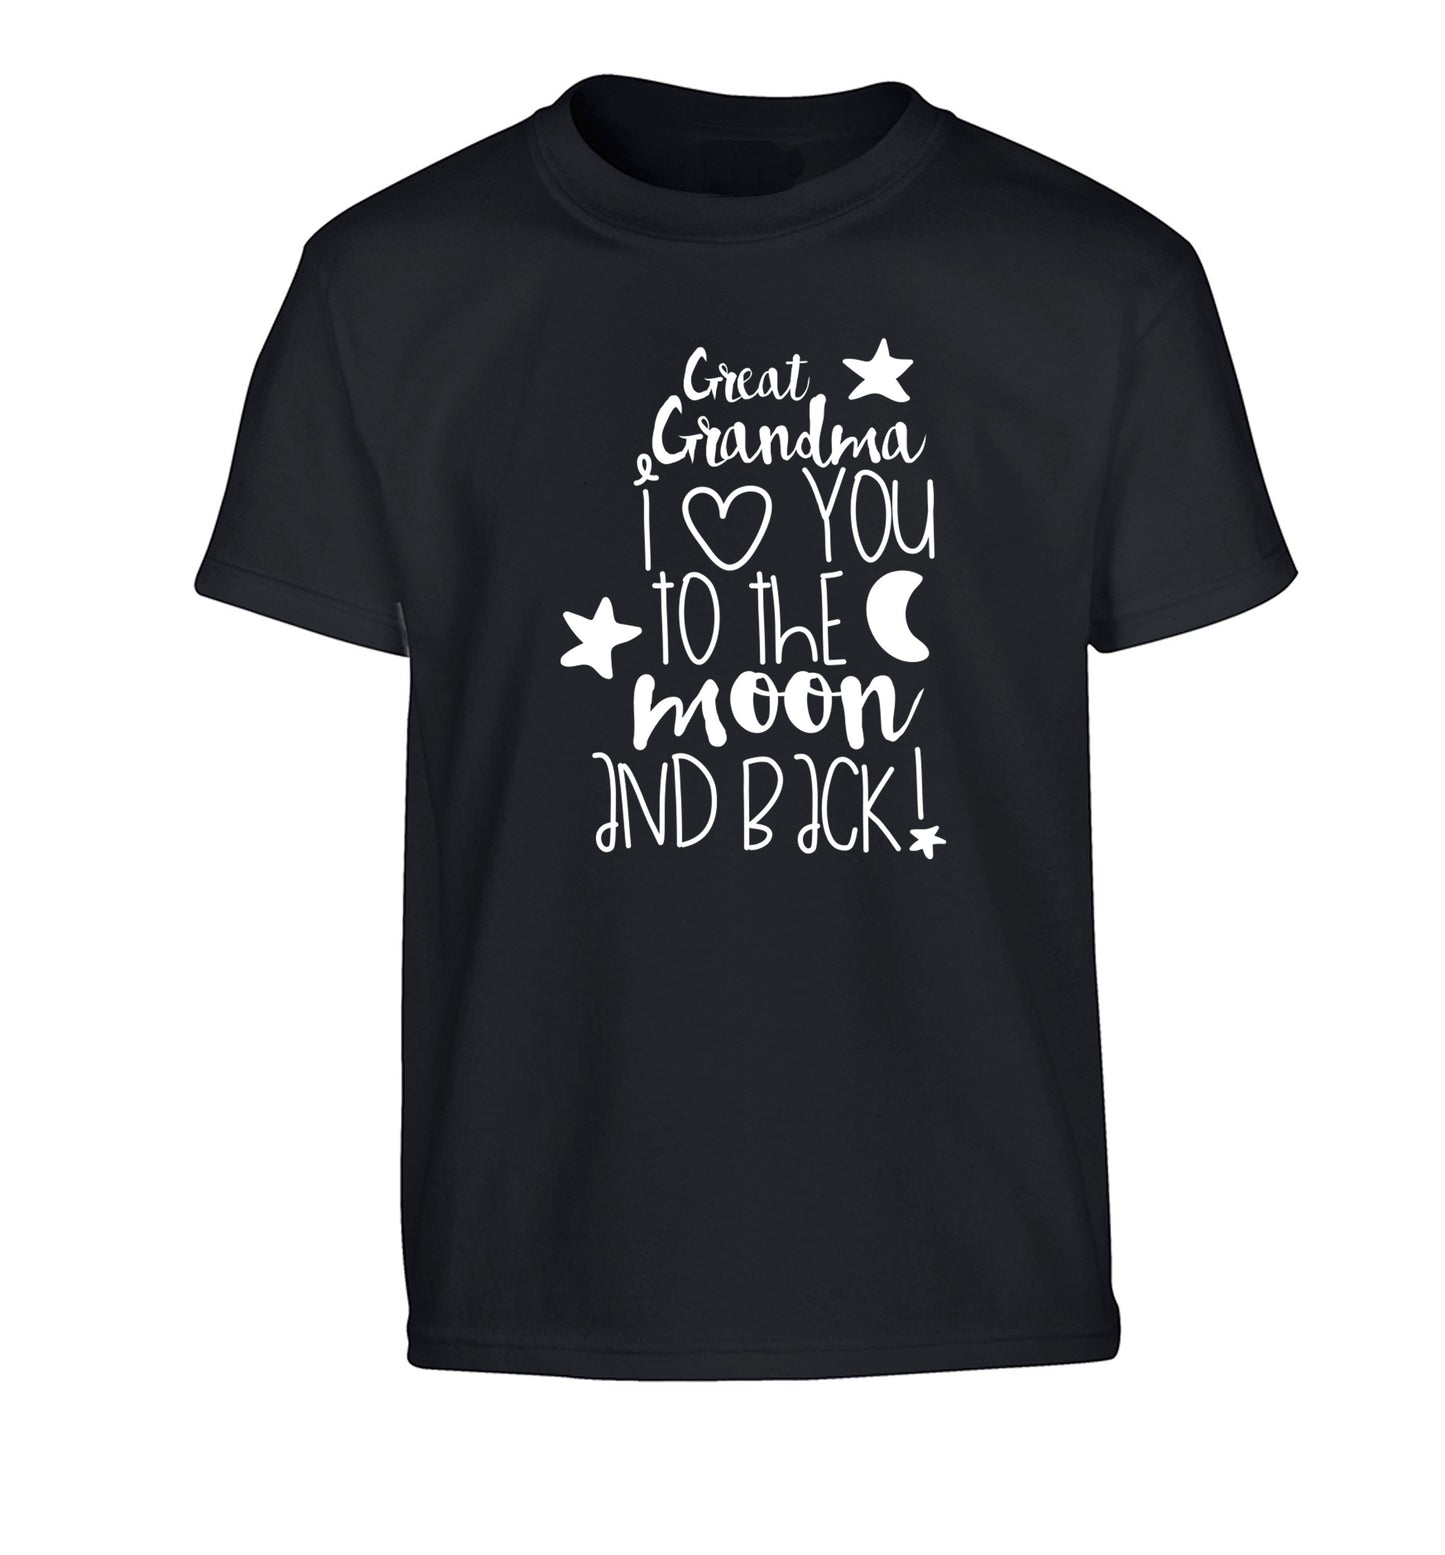 Great Grandma I love you to the moon and back Children's black Tshirt 12-14 Years